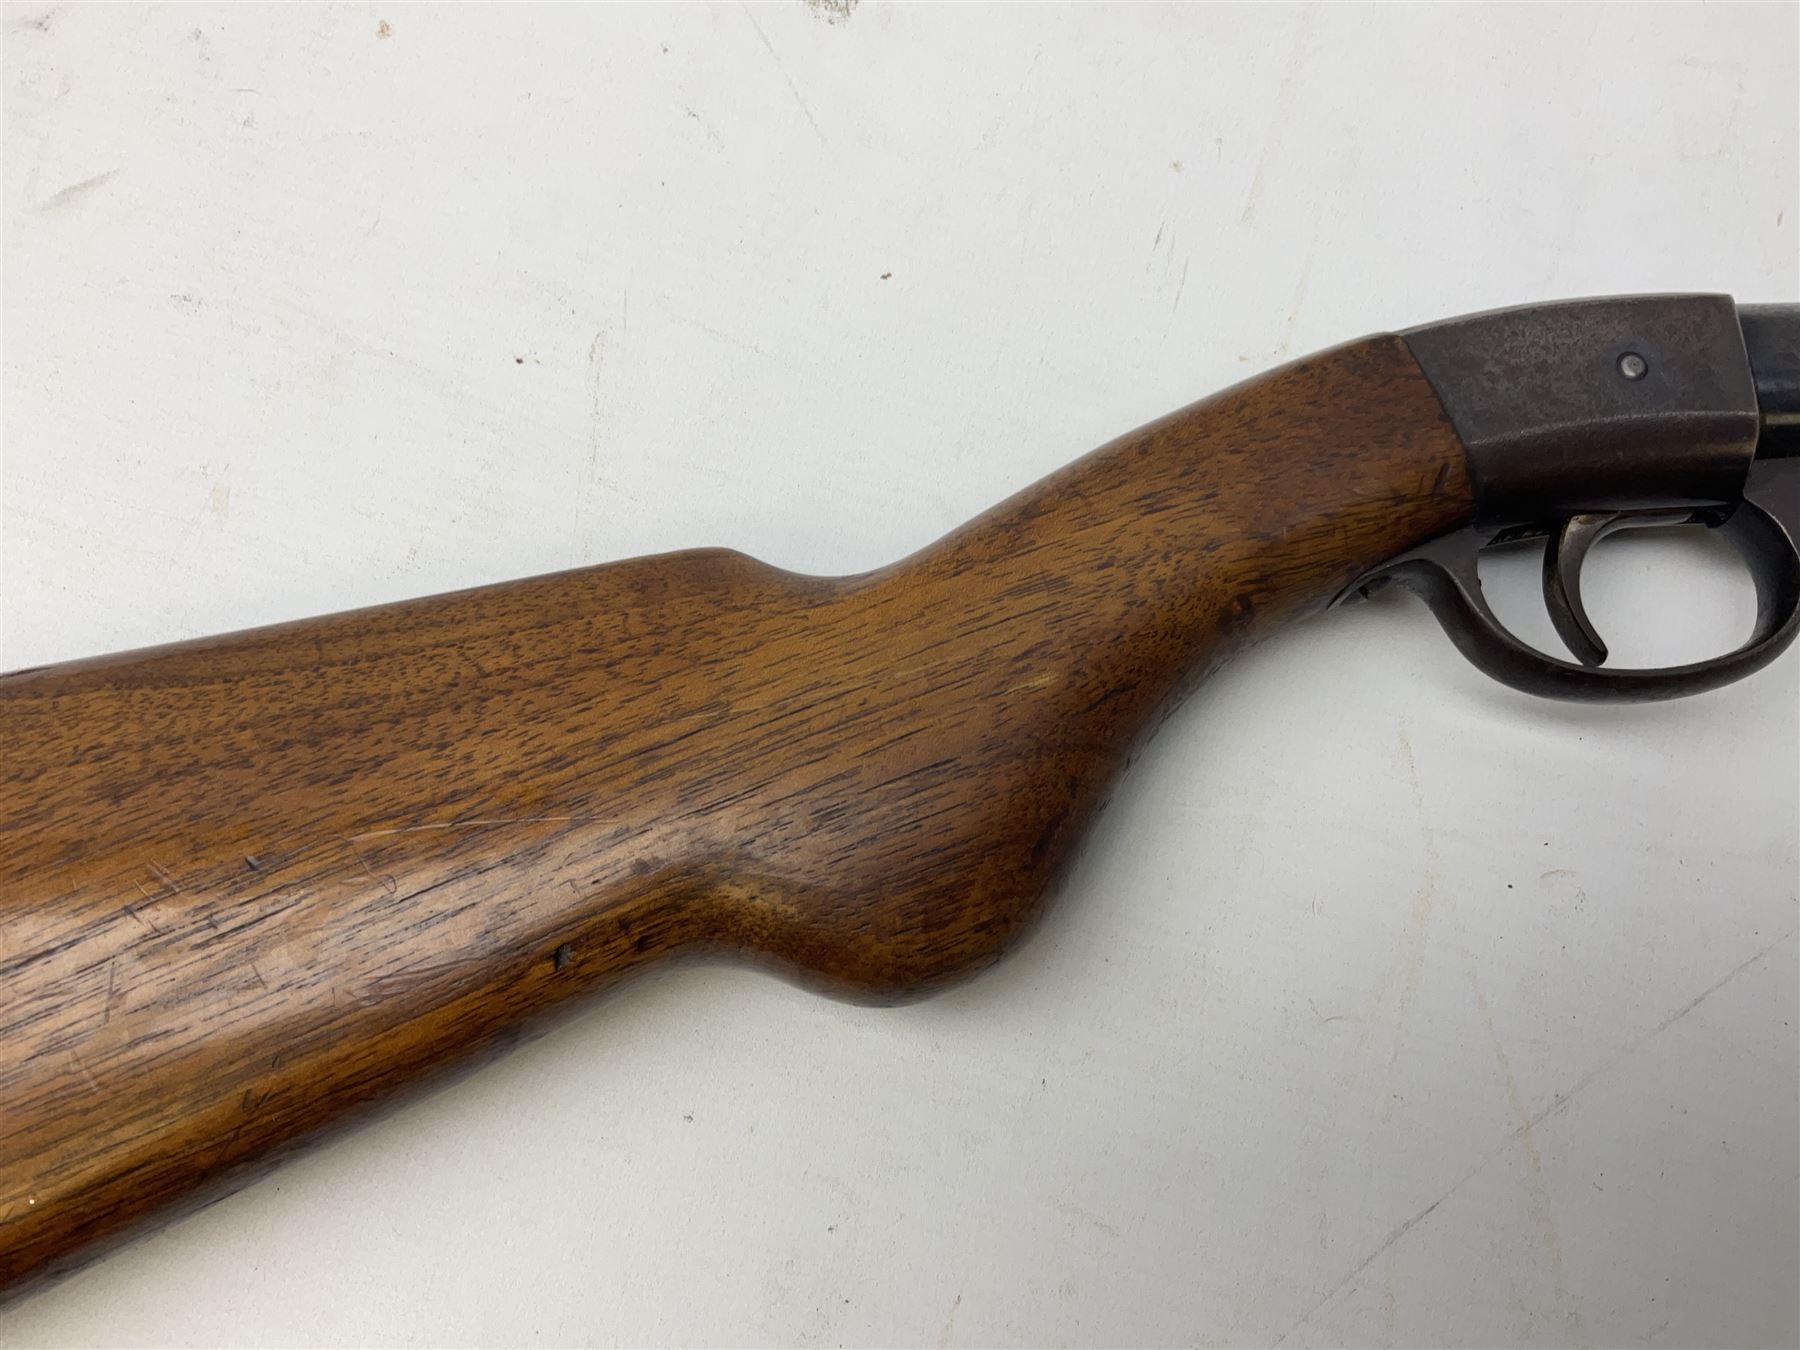 Diana Model 27 .177 air rifle with under lever action and walnut stock L108cm - Image 4 of 16